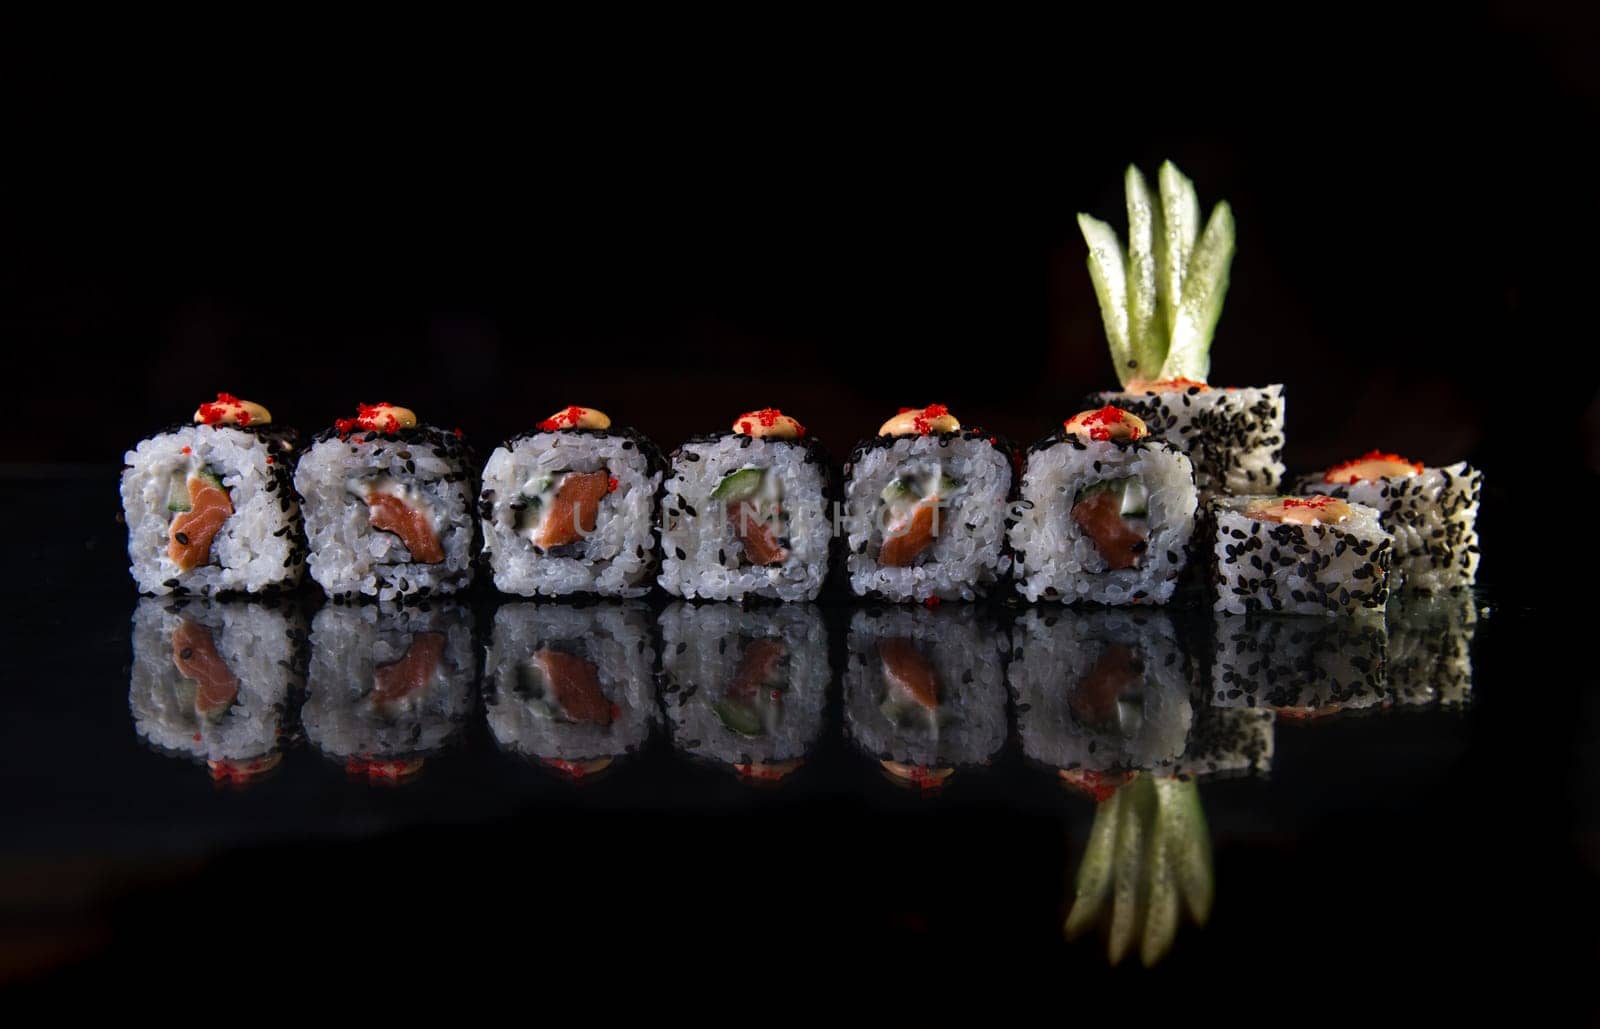 sushi with fish and chia seeds on a black background by Pukhovskiy